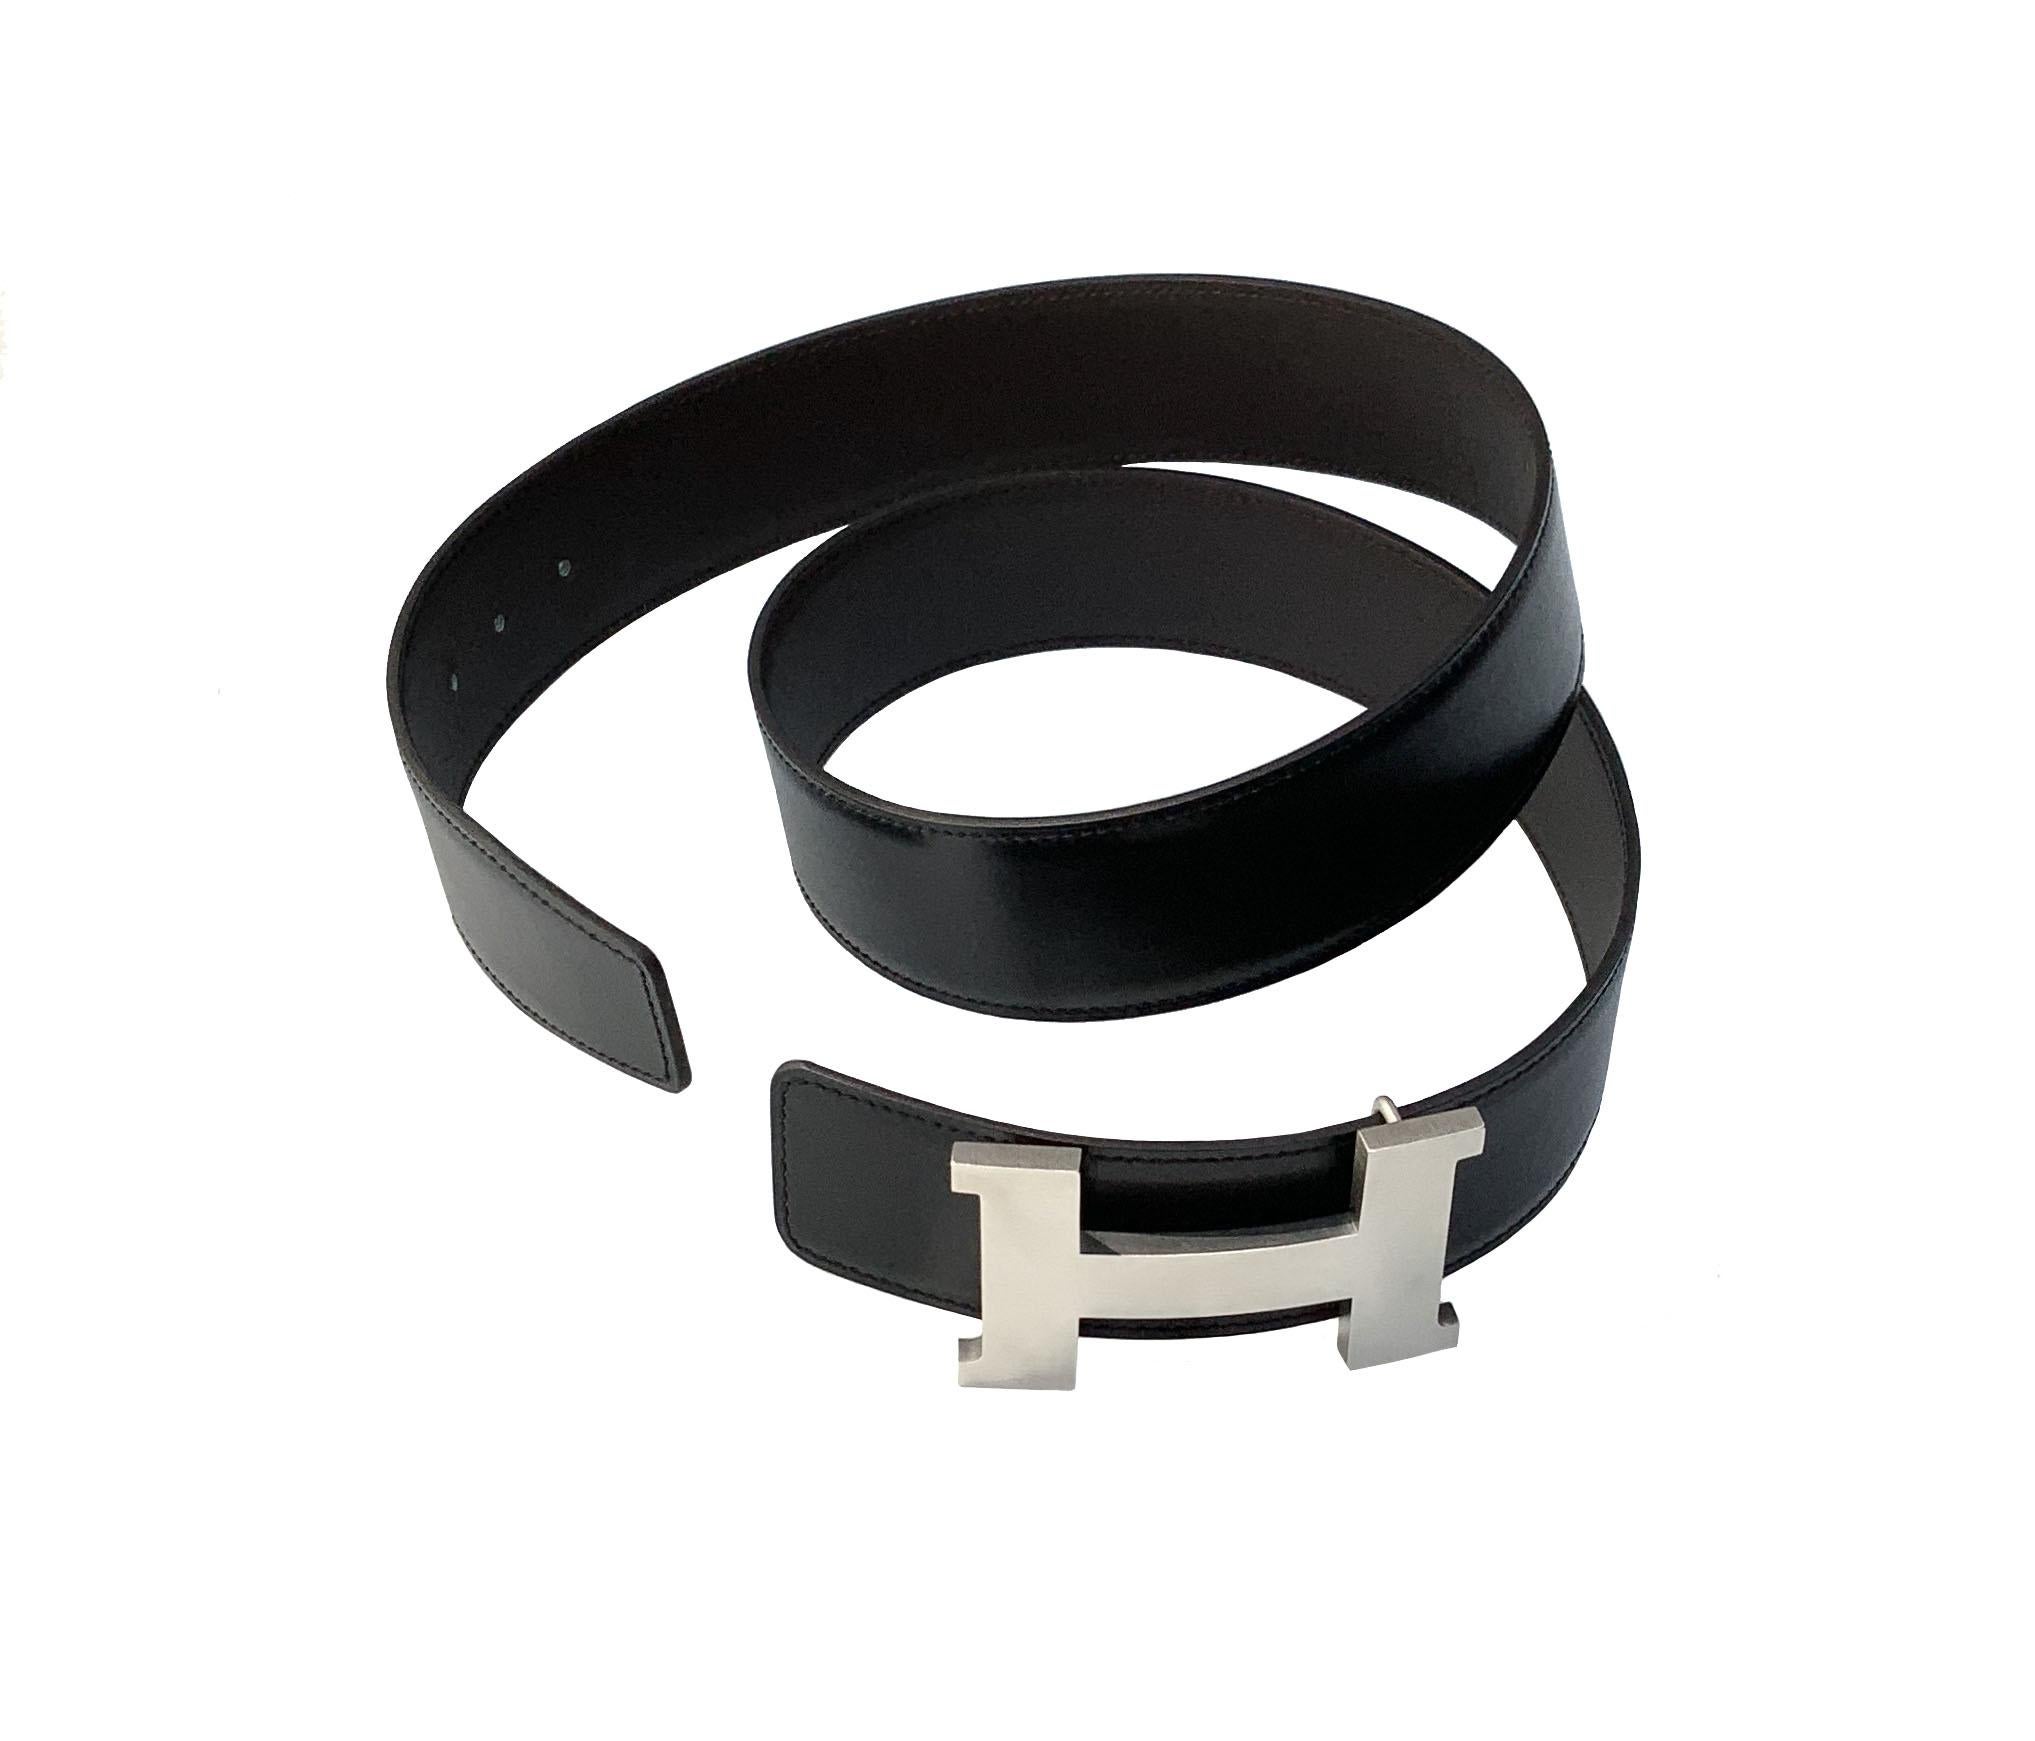 This pre-owned reversible Constance 42 belt from Hermès is crafted in the classic black Box leather and chocolat Chamonix leather with the iconic design Constance buckle in brushed palladium plated metal.

Year: 2011
BELT
Material: Box leather and